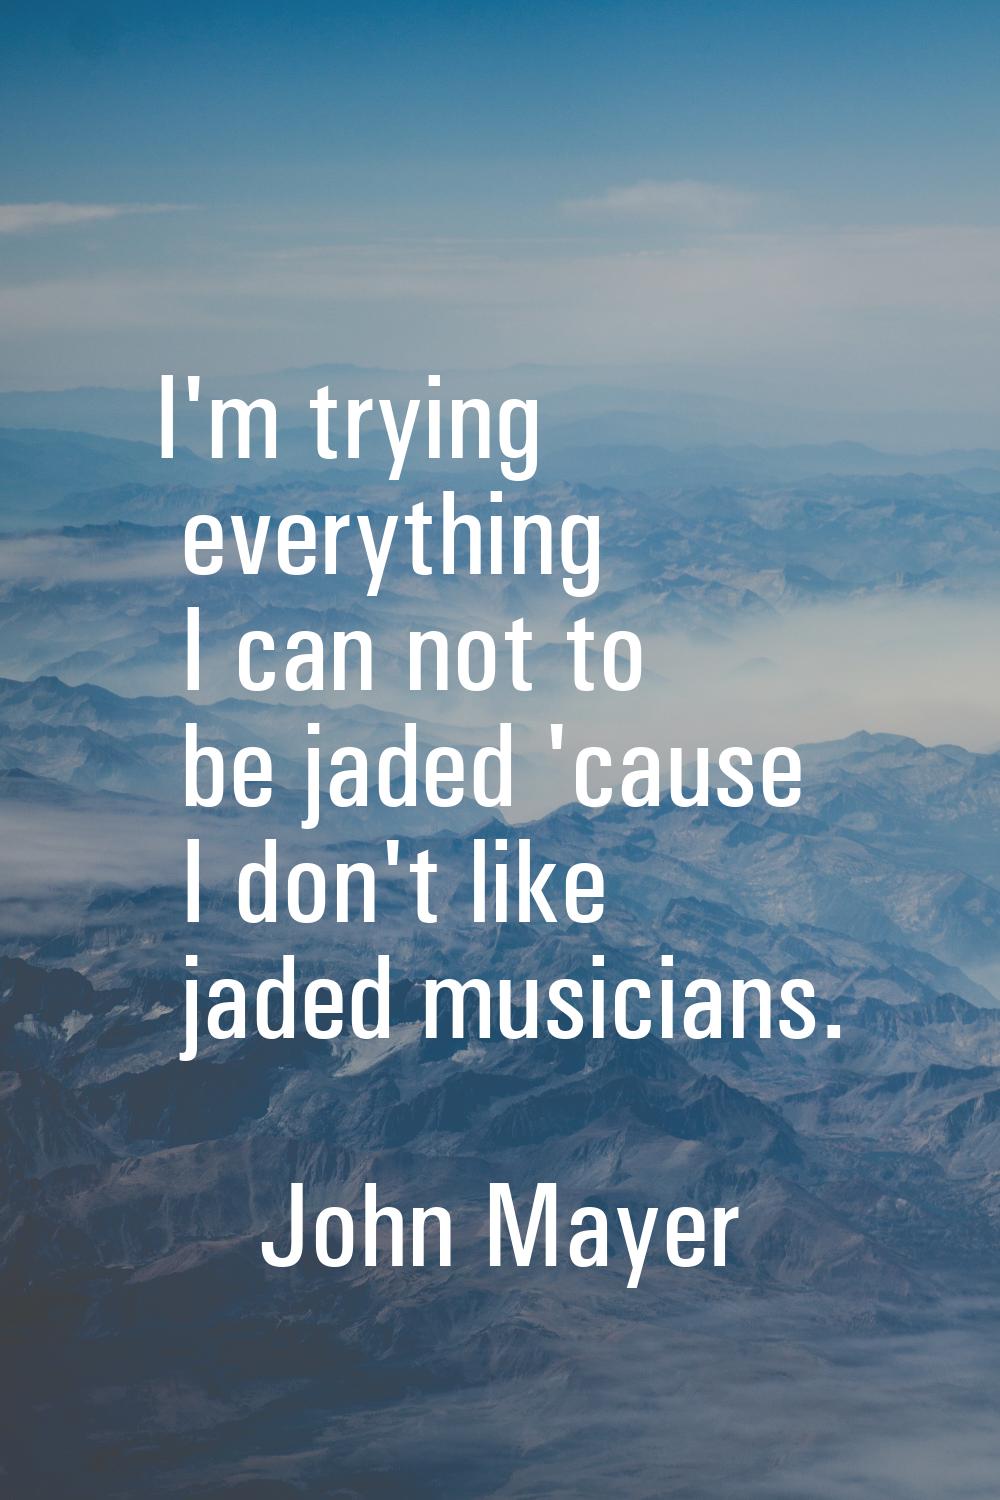 I'm trying everything I can not to be jaded 'cause I don't like jaded musicians.